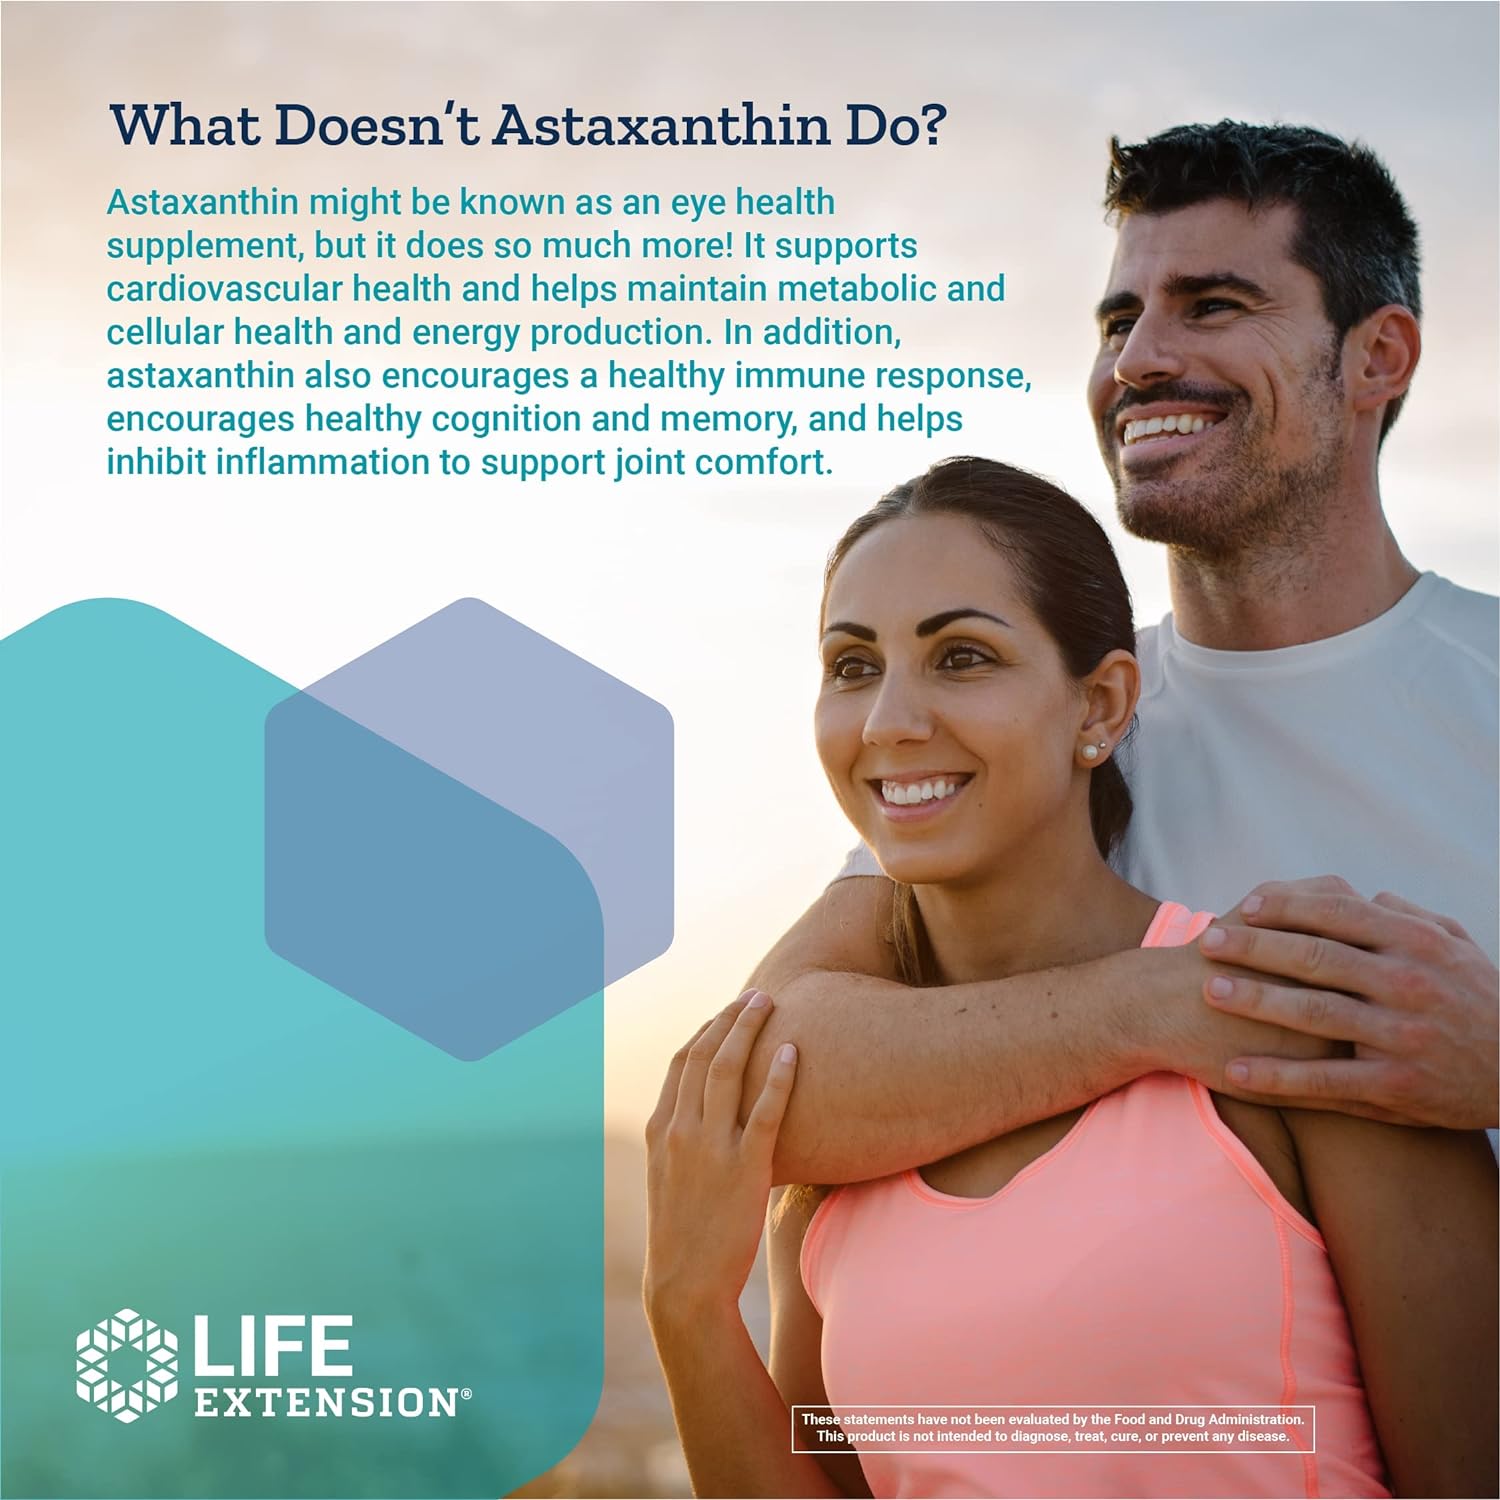 Life Extension Astaxanthin with Phospholipids 4 mg - For Eye & Heart Health + Metabolic & Cardiovascular Health - Supports Inflammatory & Immune Response - Gluten Free, Non-GMO - 30 Softgels : Health & Household